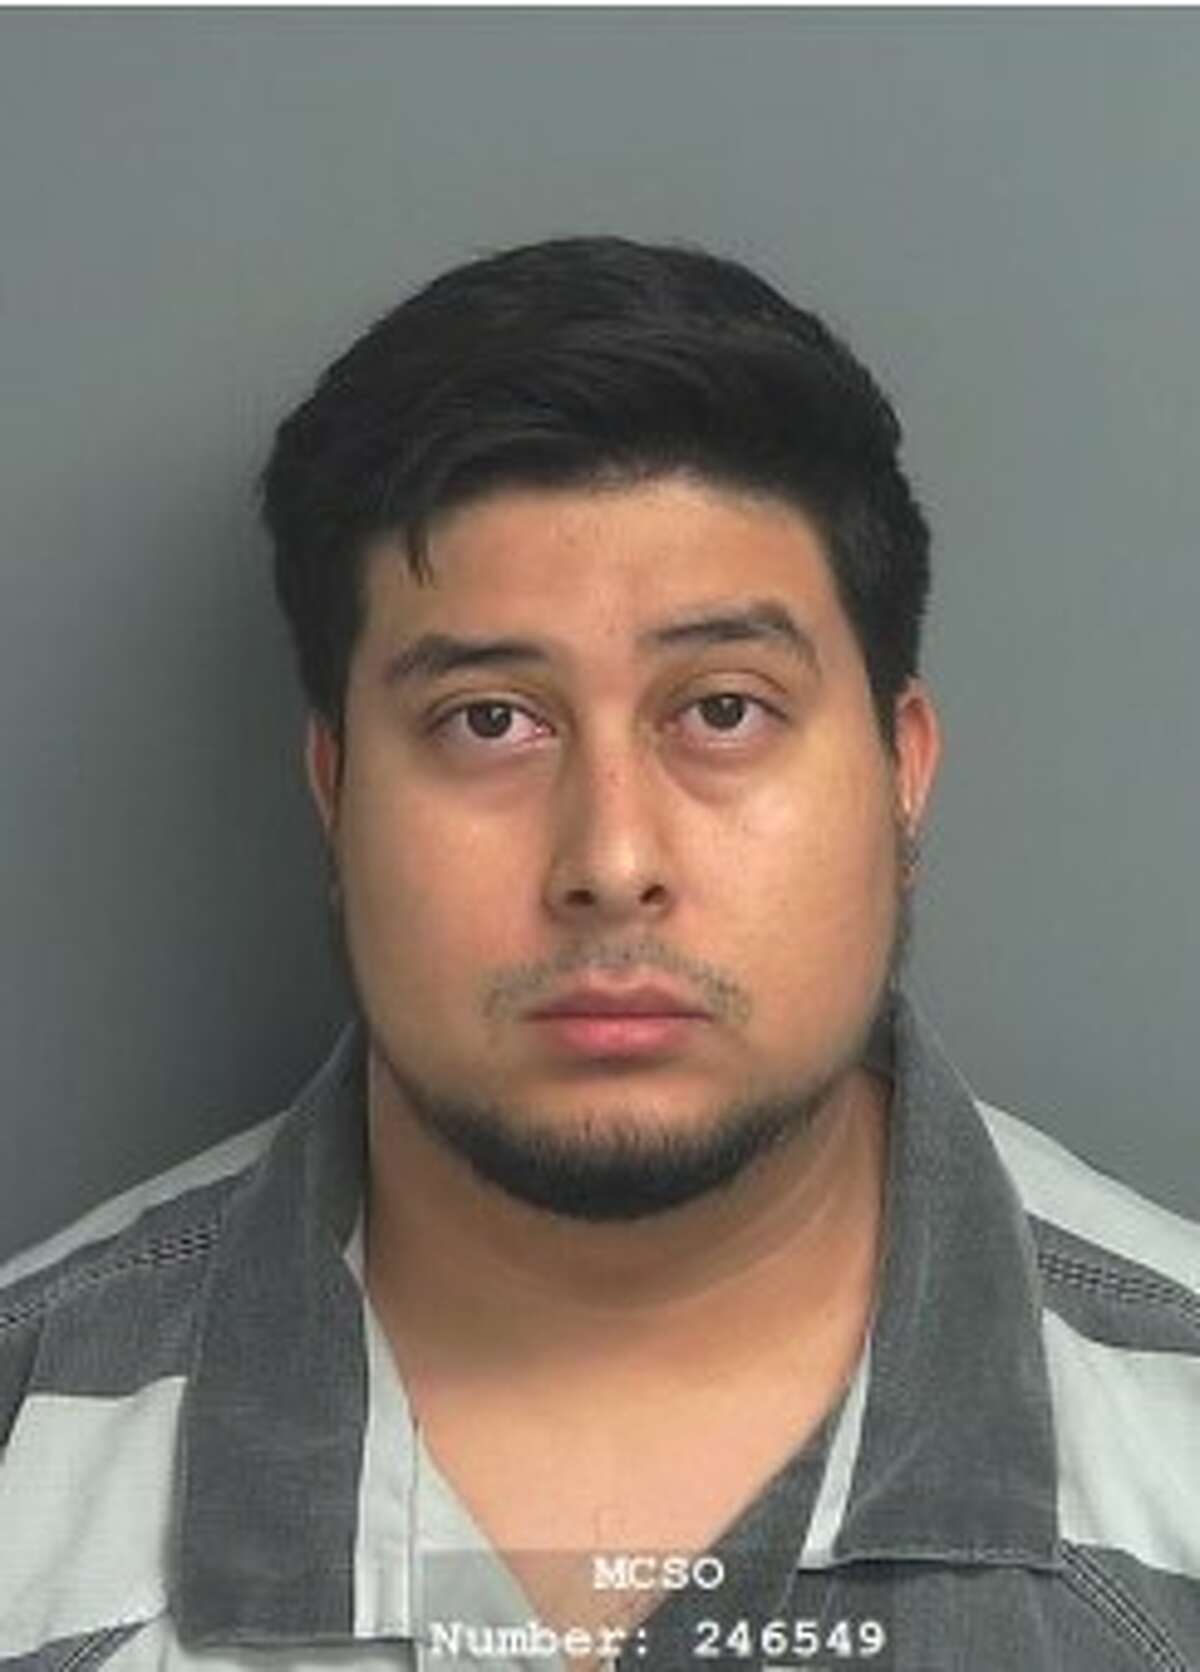 Jose Alfredo Avila was charged with online solicitation of a minor.